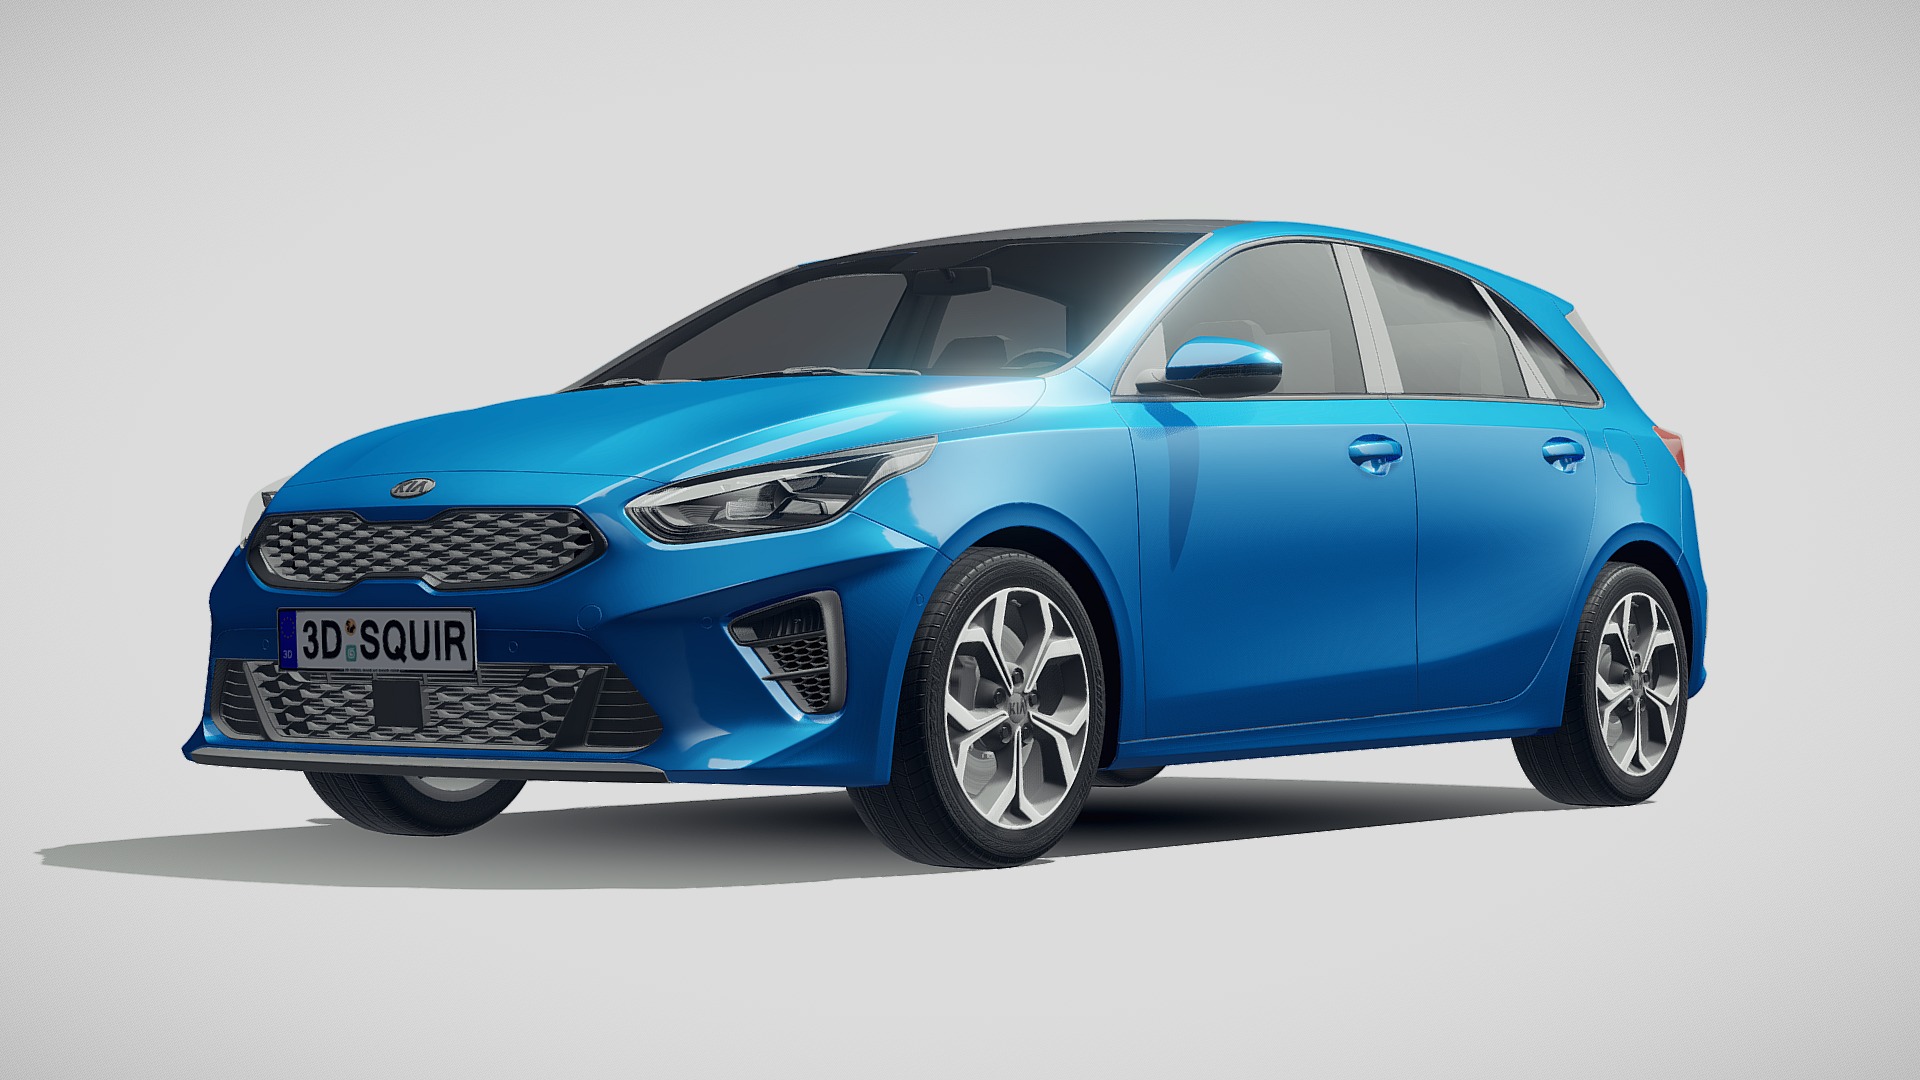 3D model Kia Ceed 2019 - This is a 3D model of the Kia Ceed 2019. The 3D model is about a blue car with a white background.